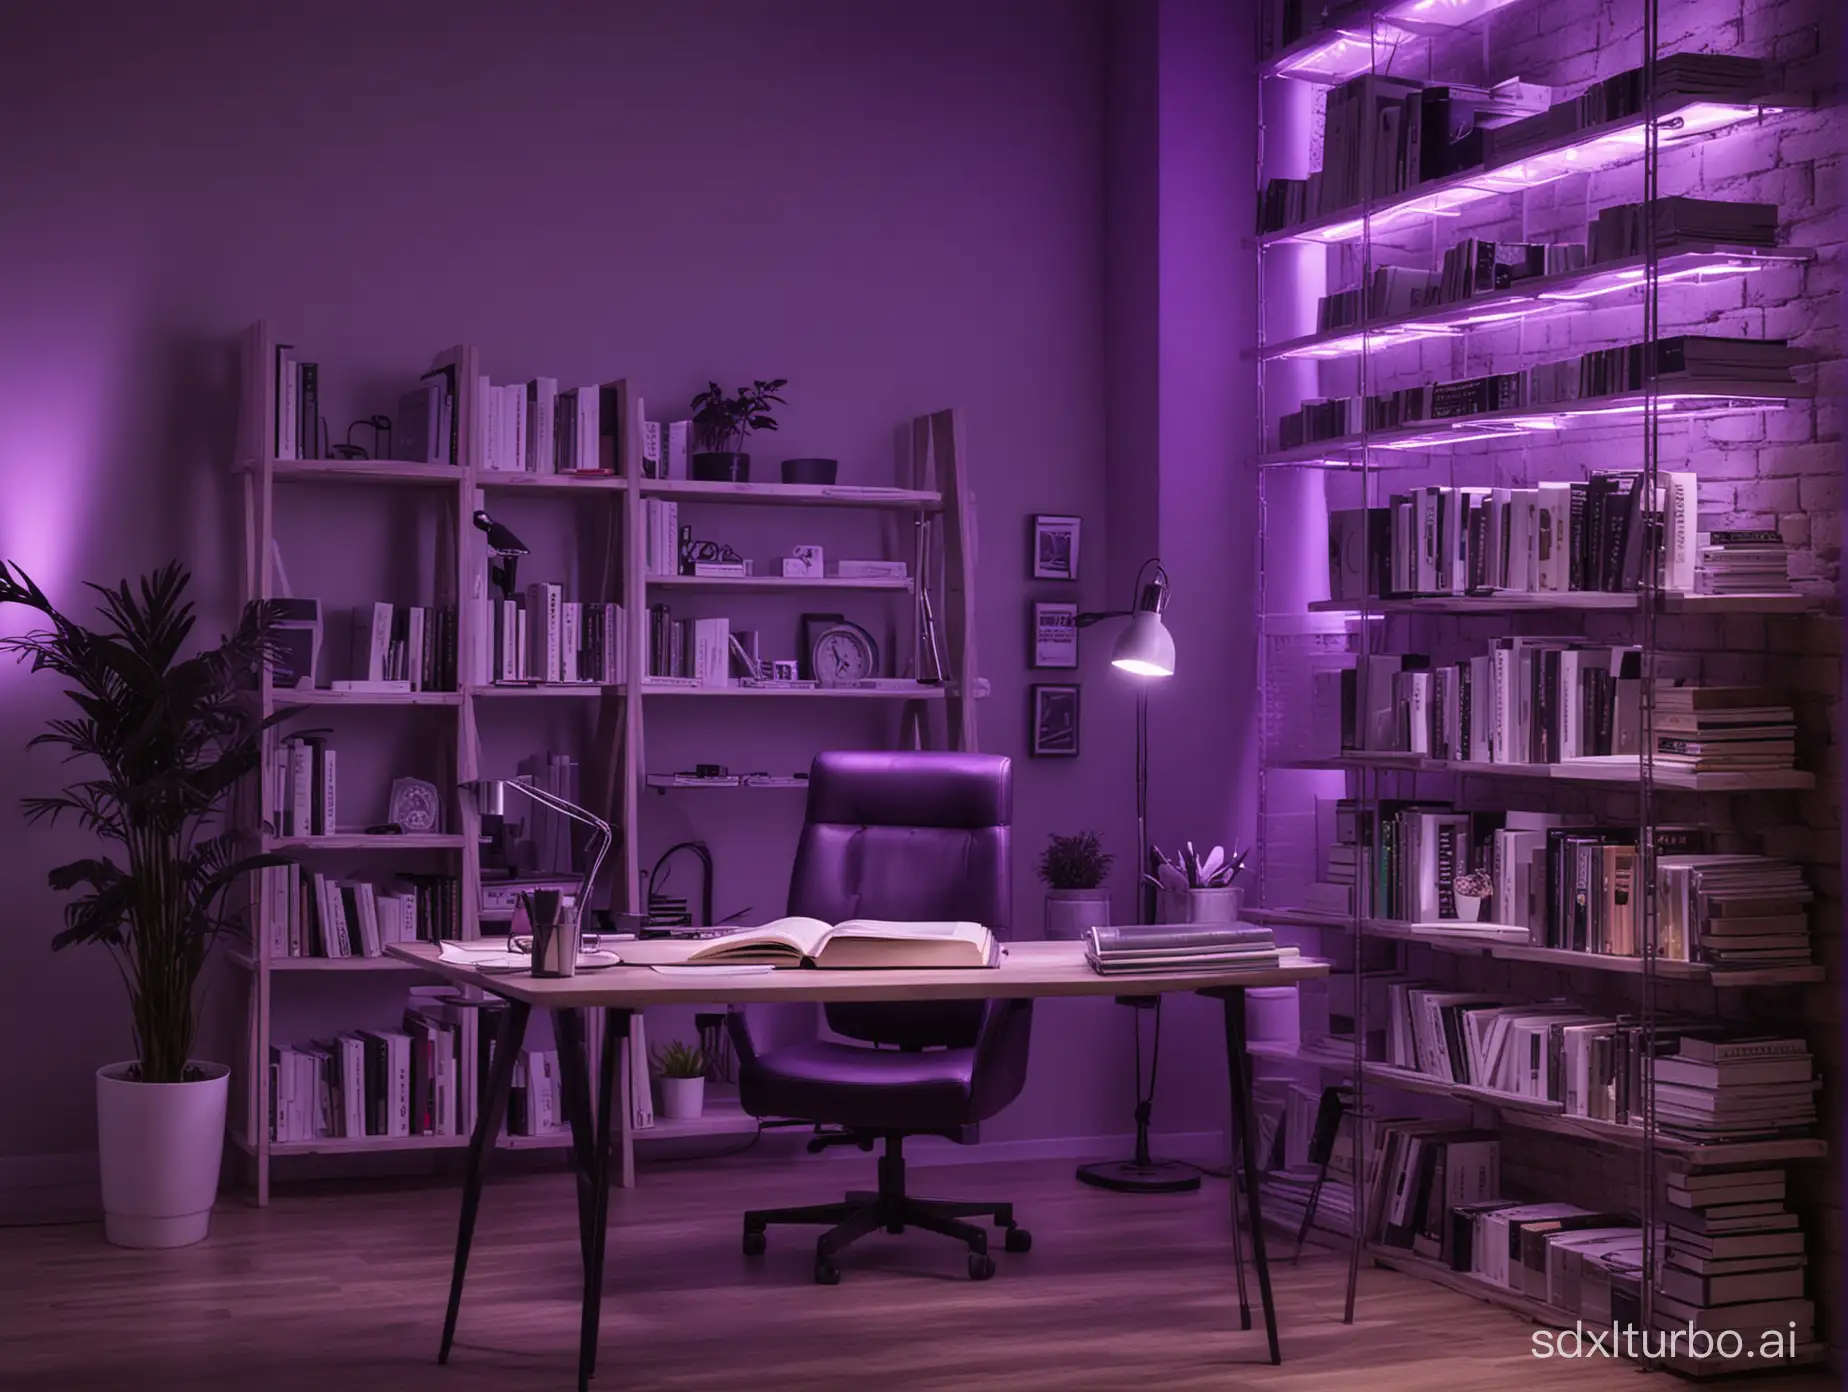 Office-Space-with-Bookshelf-and-Mysterious-Purple-Ambiance